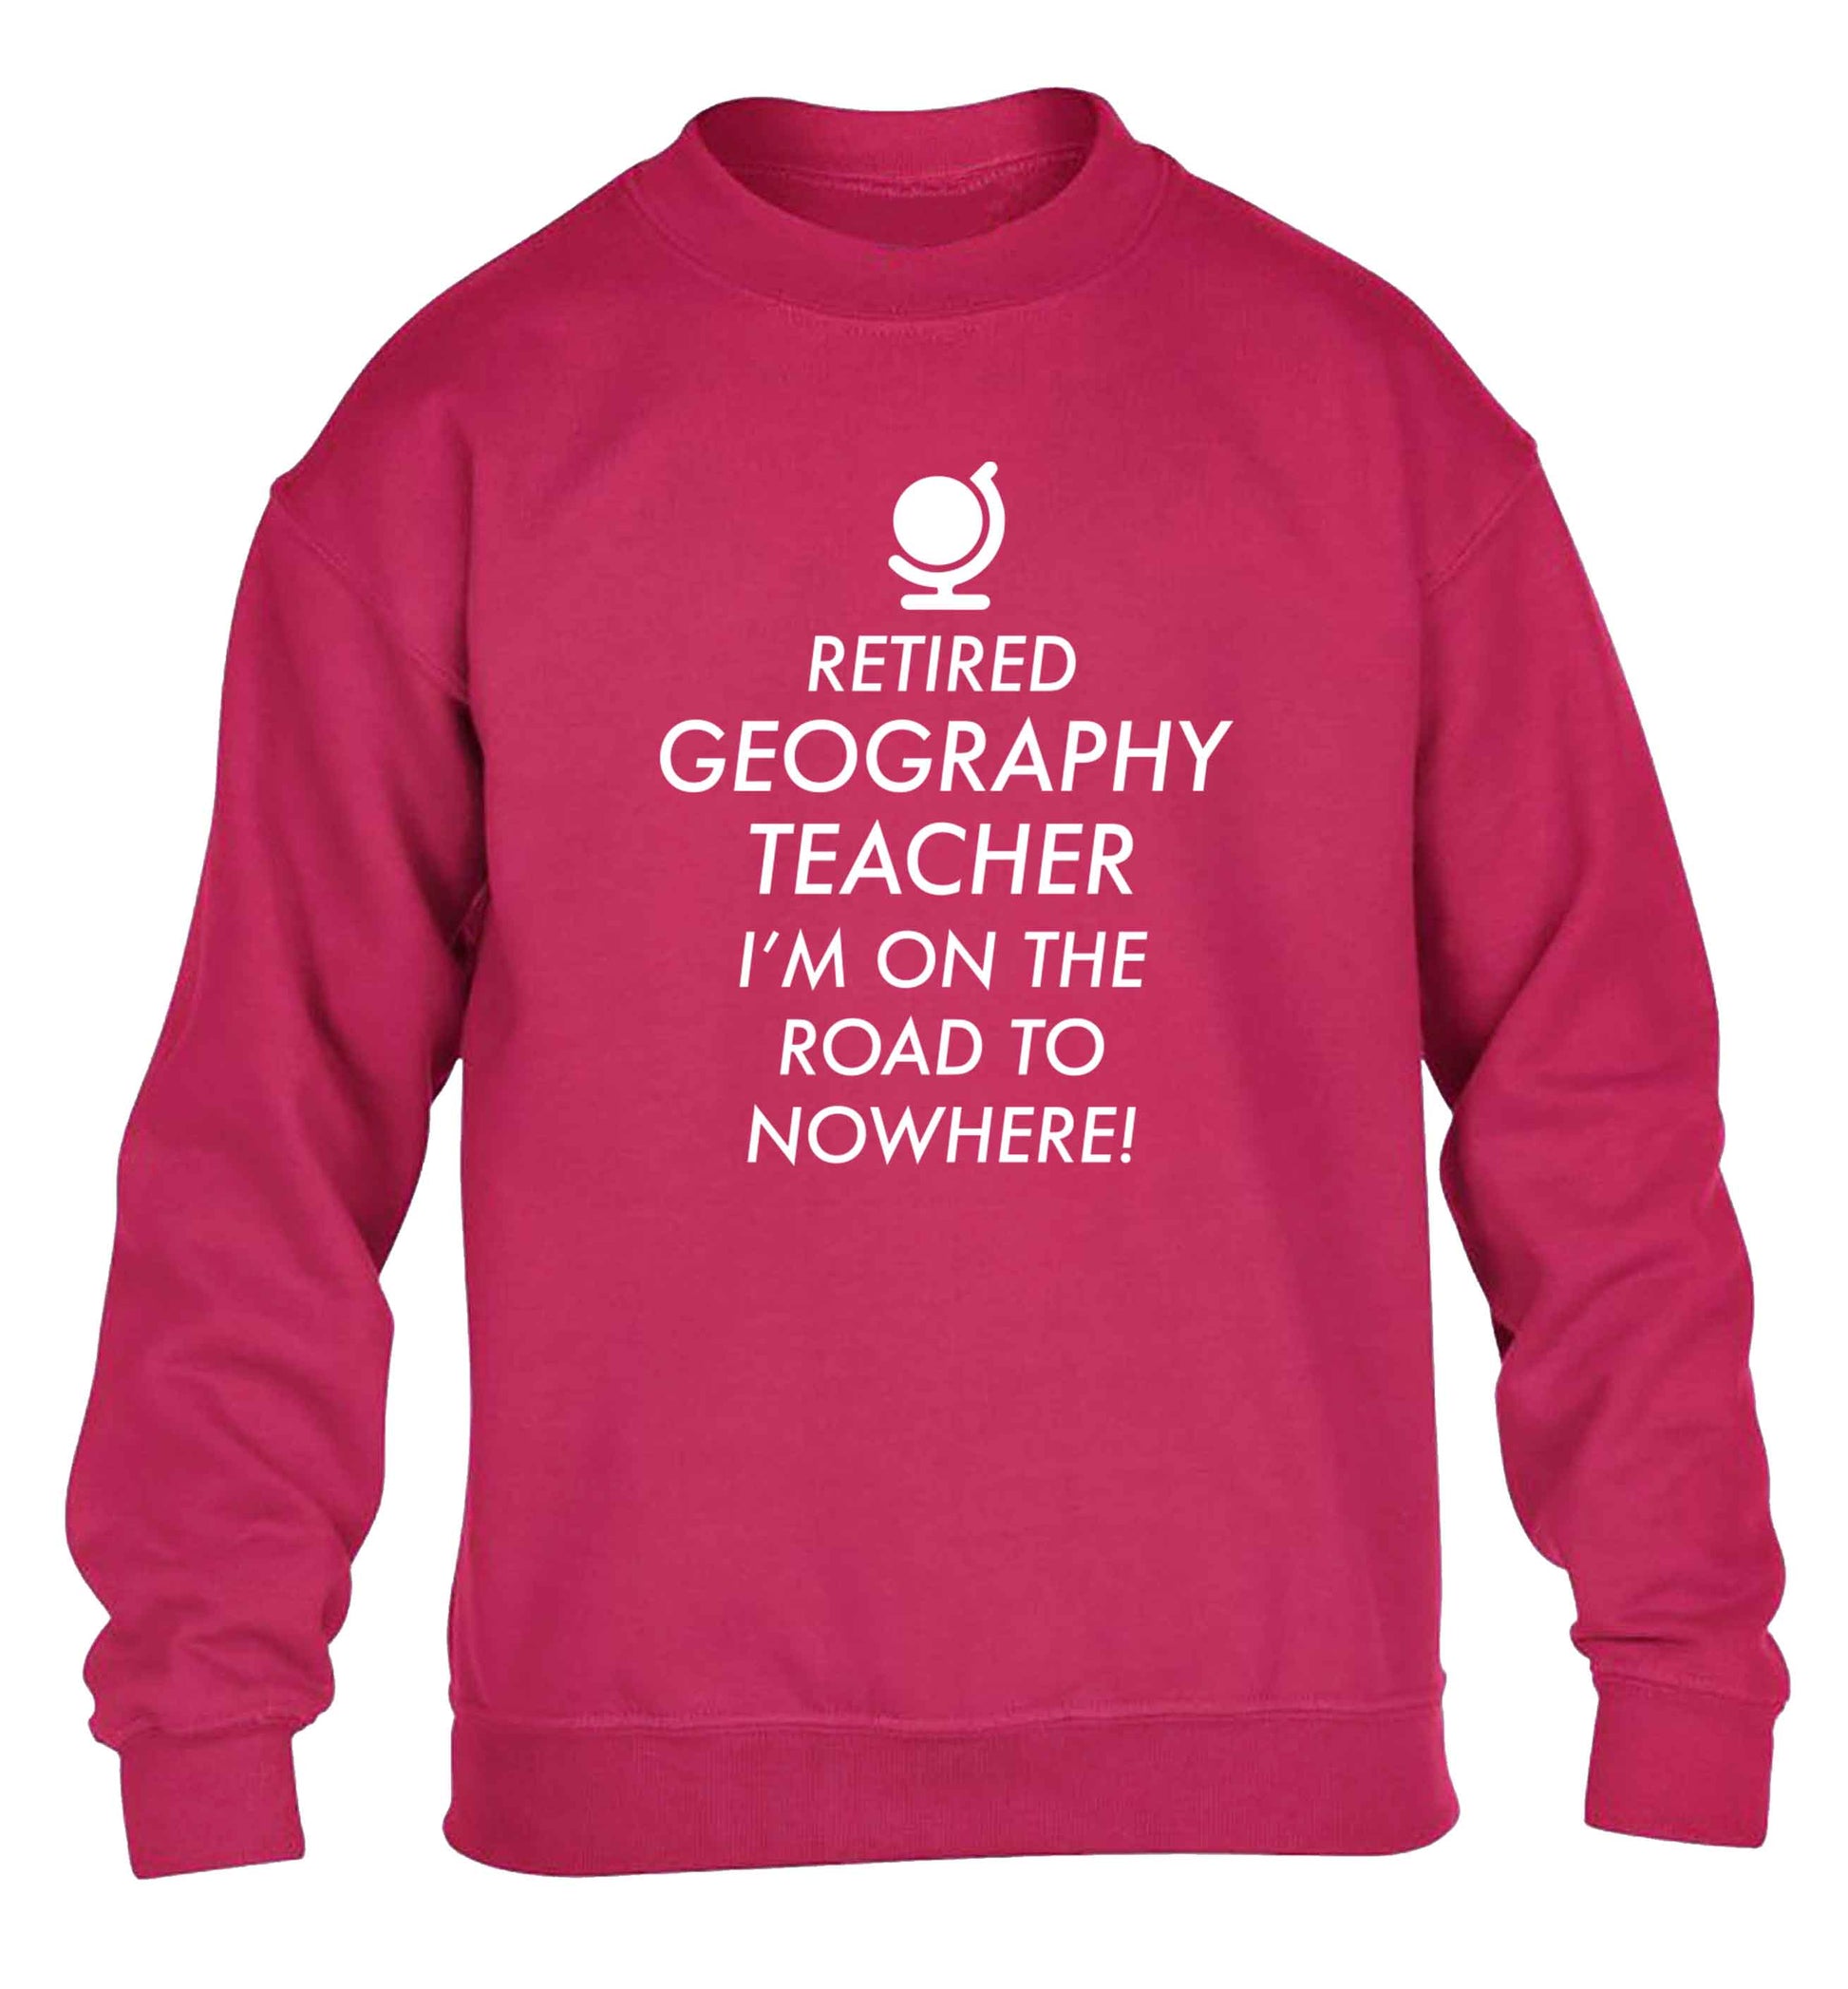 Retired geography teacher I'm on the road to nowhere children's pink sweater 12-13 Years